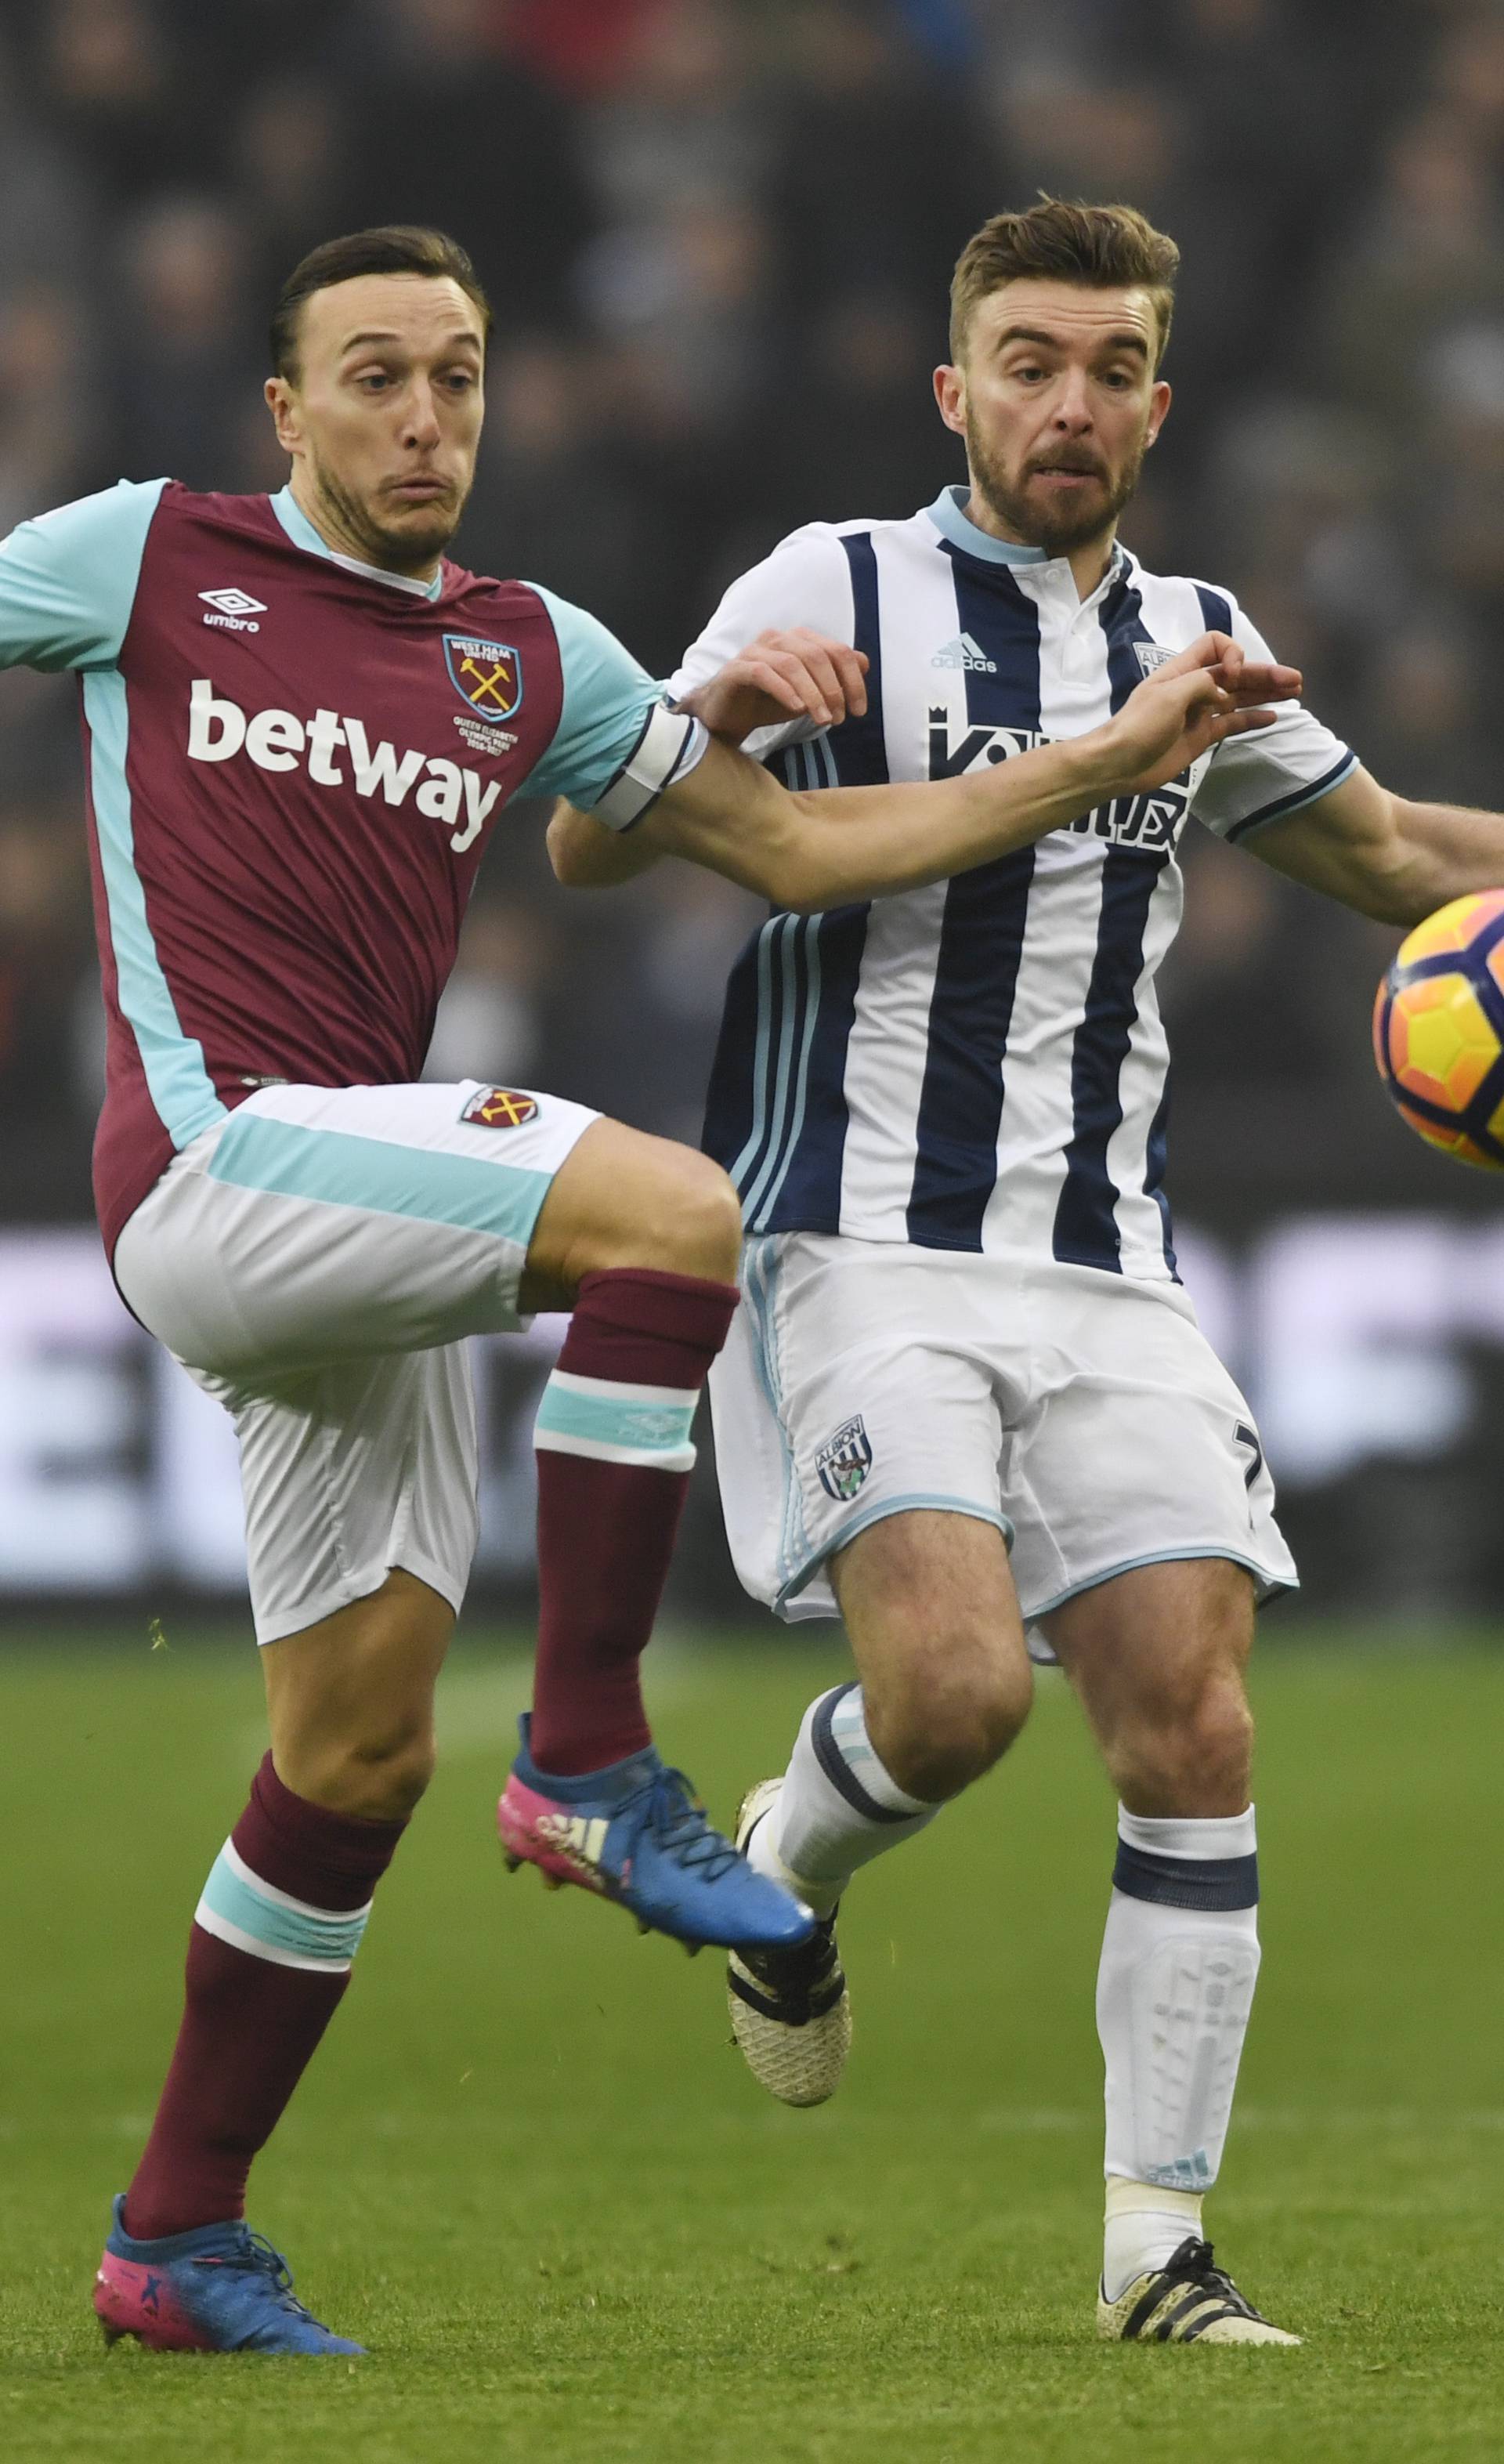 West Ham United's Mark Noble in action with West Bromwich Albion's James Morrison